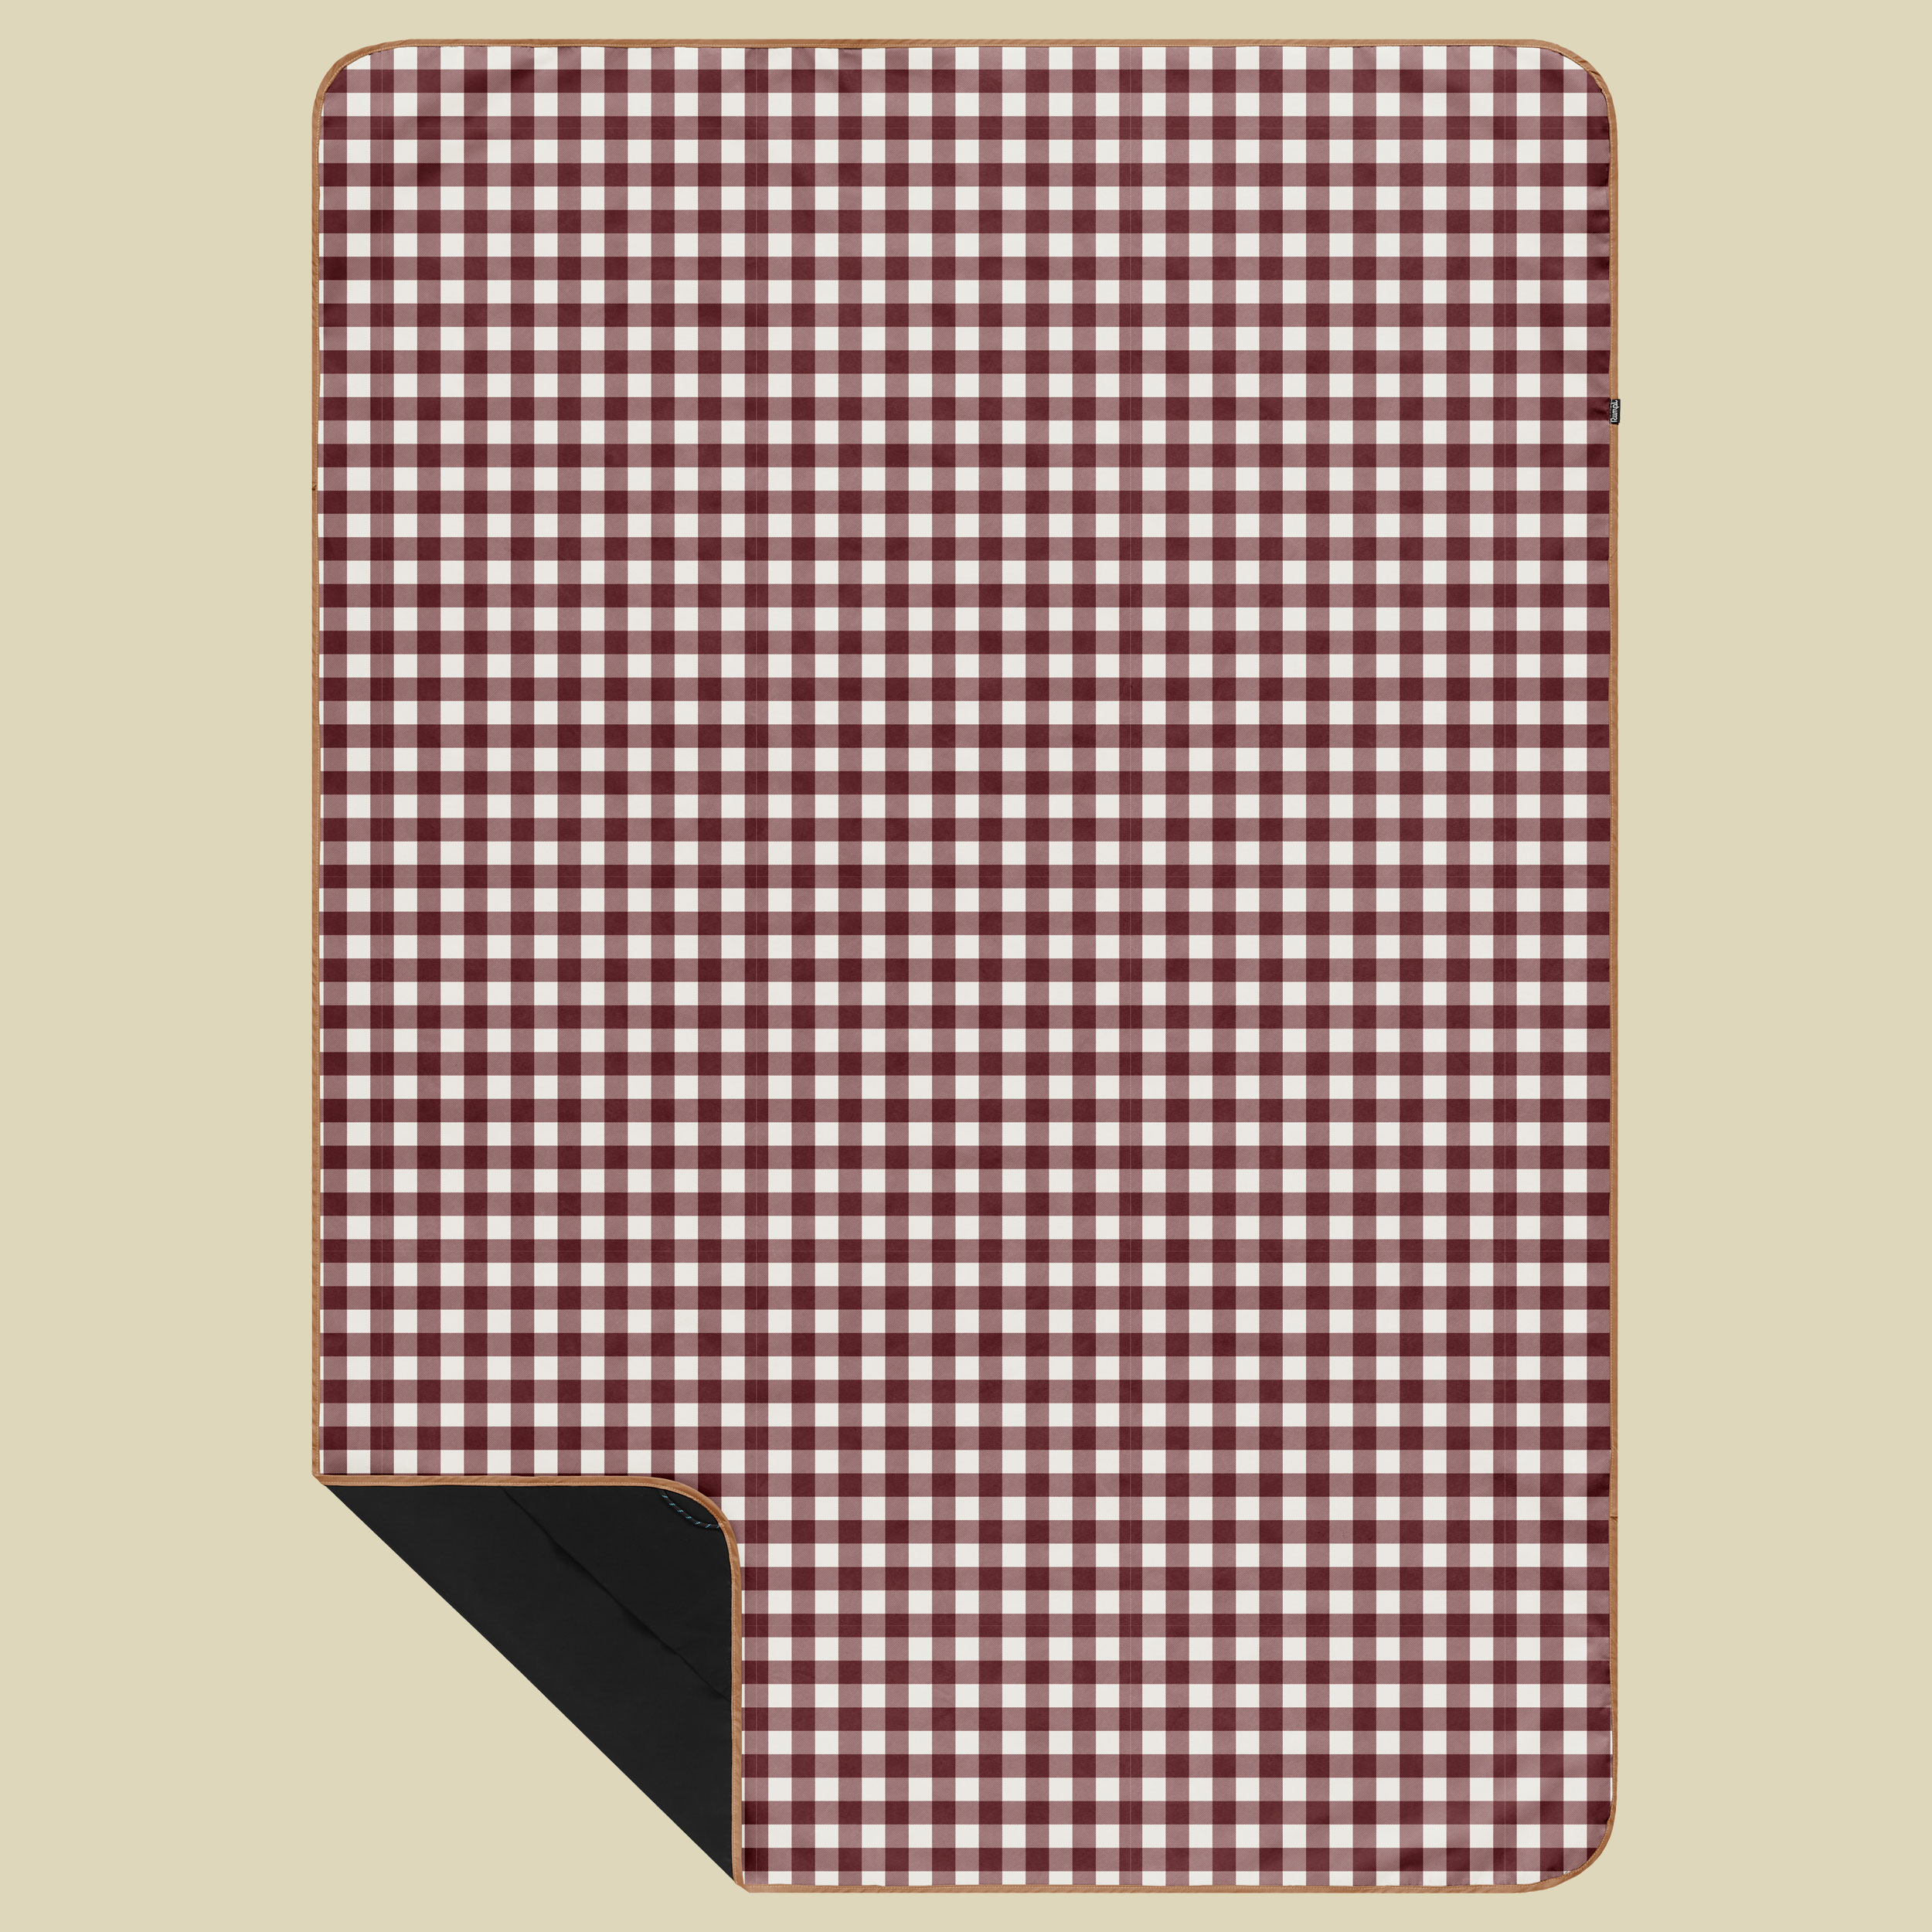 Everywhere Stash Mat Größe one size Farbe red gingham